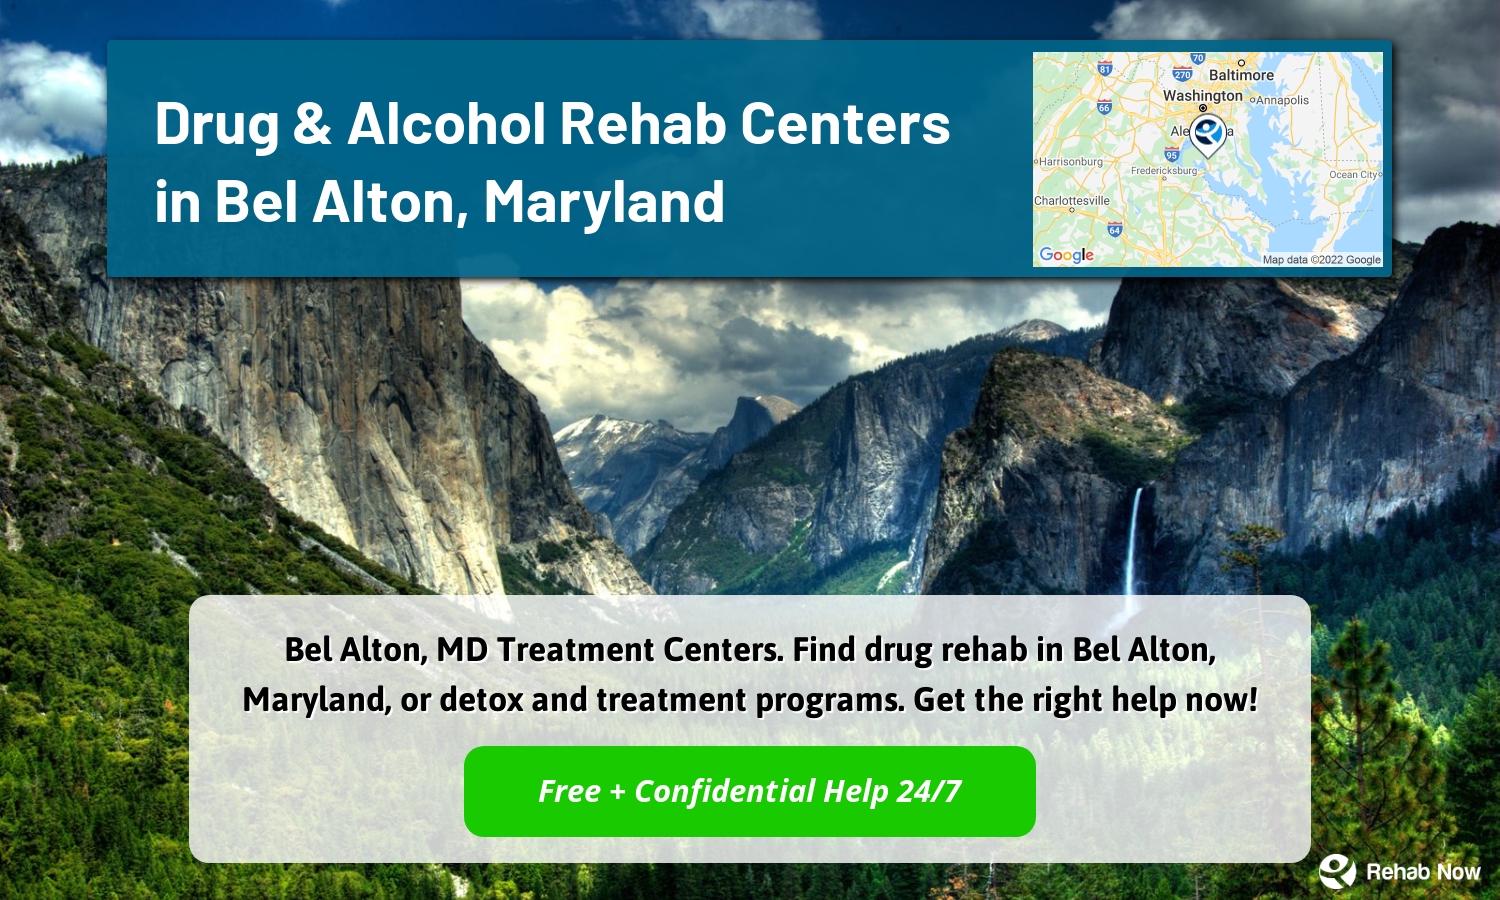 Bel Alton, MD Treatment Centers. Find drug rehab in Bel Alton, Maryland, or detox and treatment programs. Get the right help now!